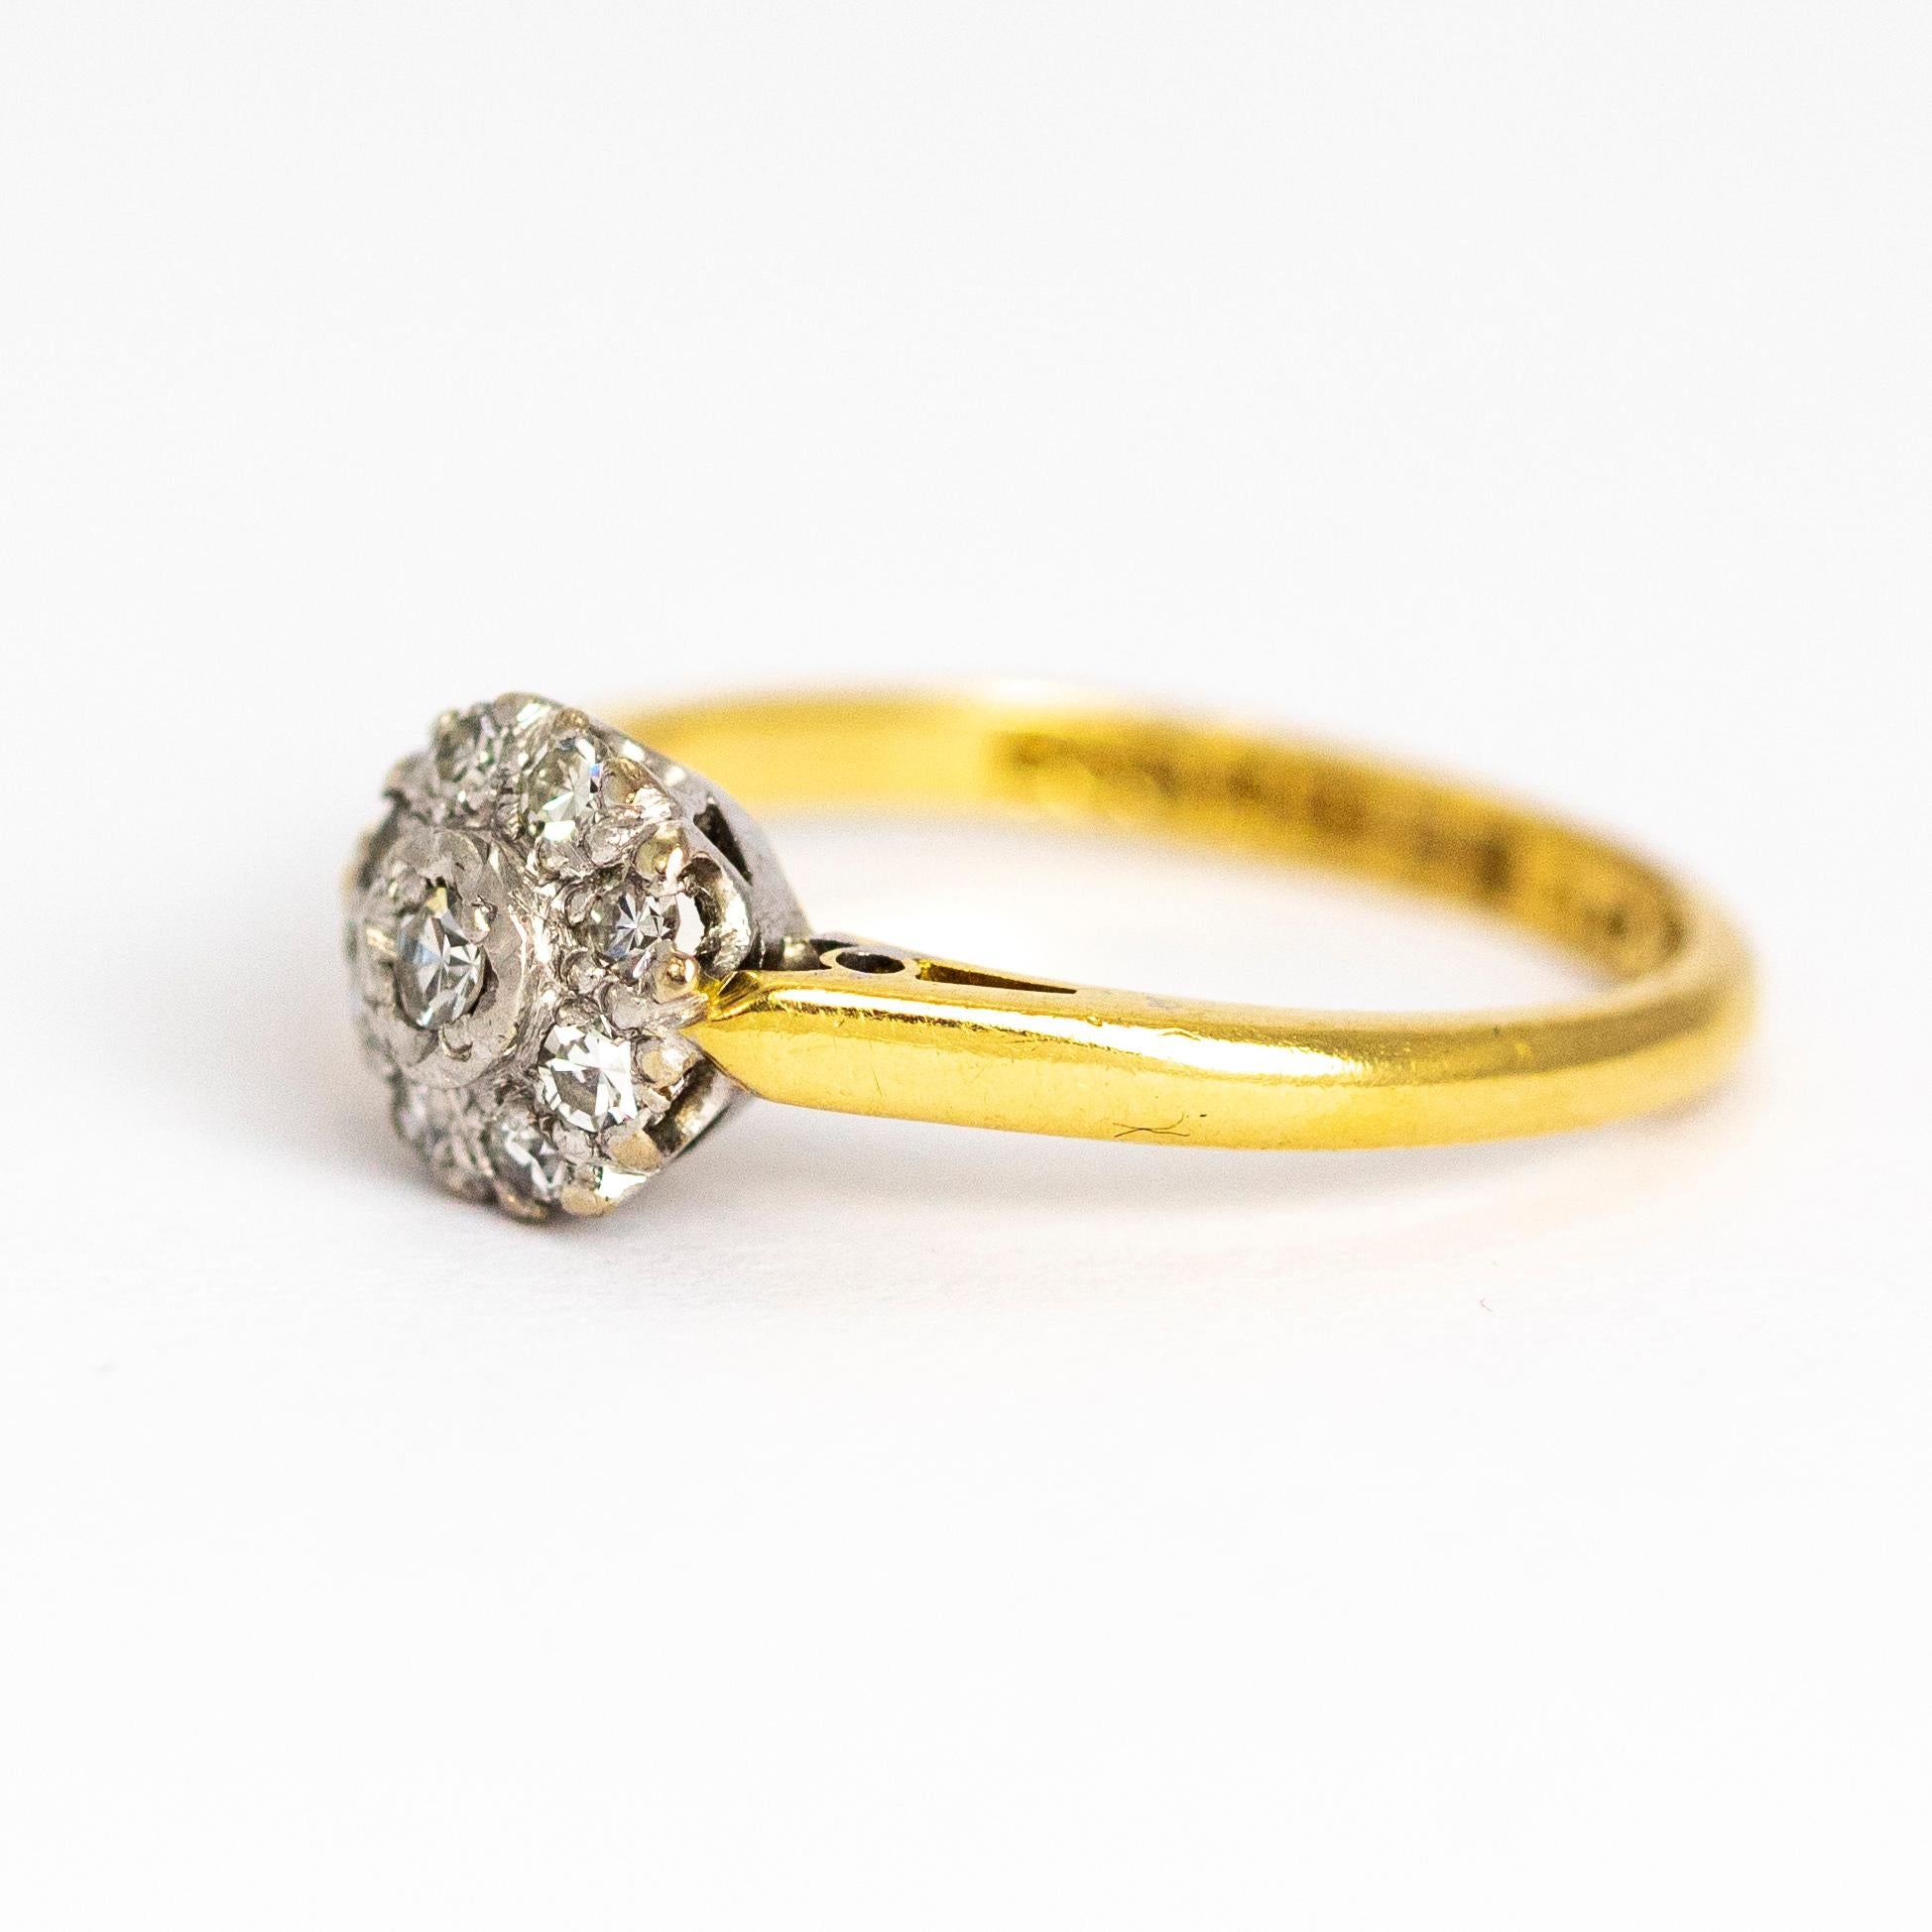 This ring has such a sparkle to it! The cluster holds a central diamond and eight smaller diamonds around it. The ring is modelled out of 18 carat gold and the diamonds are set in platinum. Made in Birmingham, England.

Ring Size: M or 6 1/4